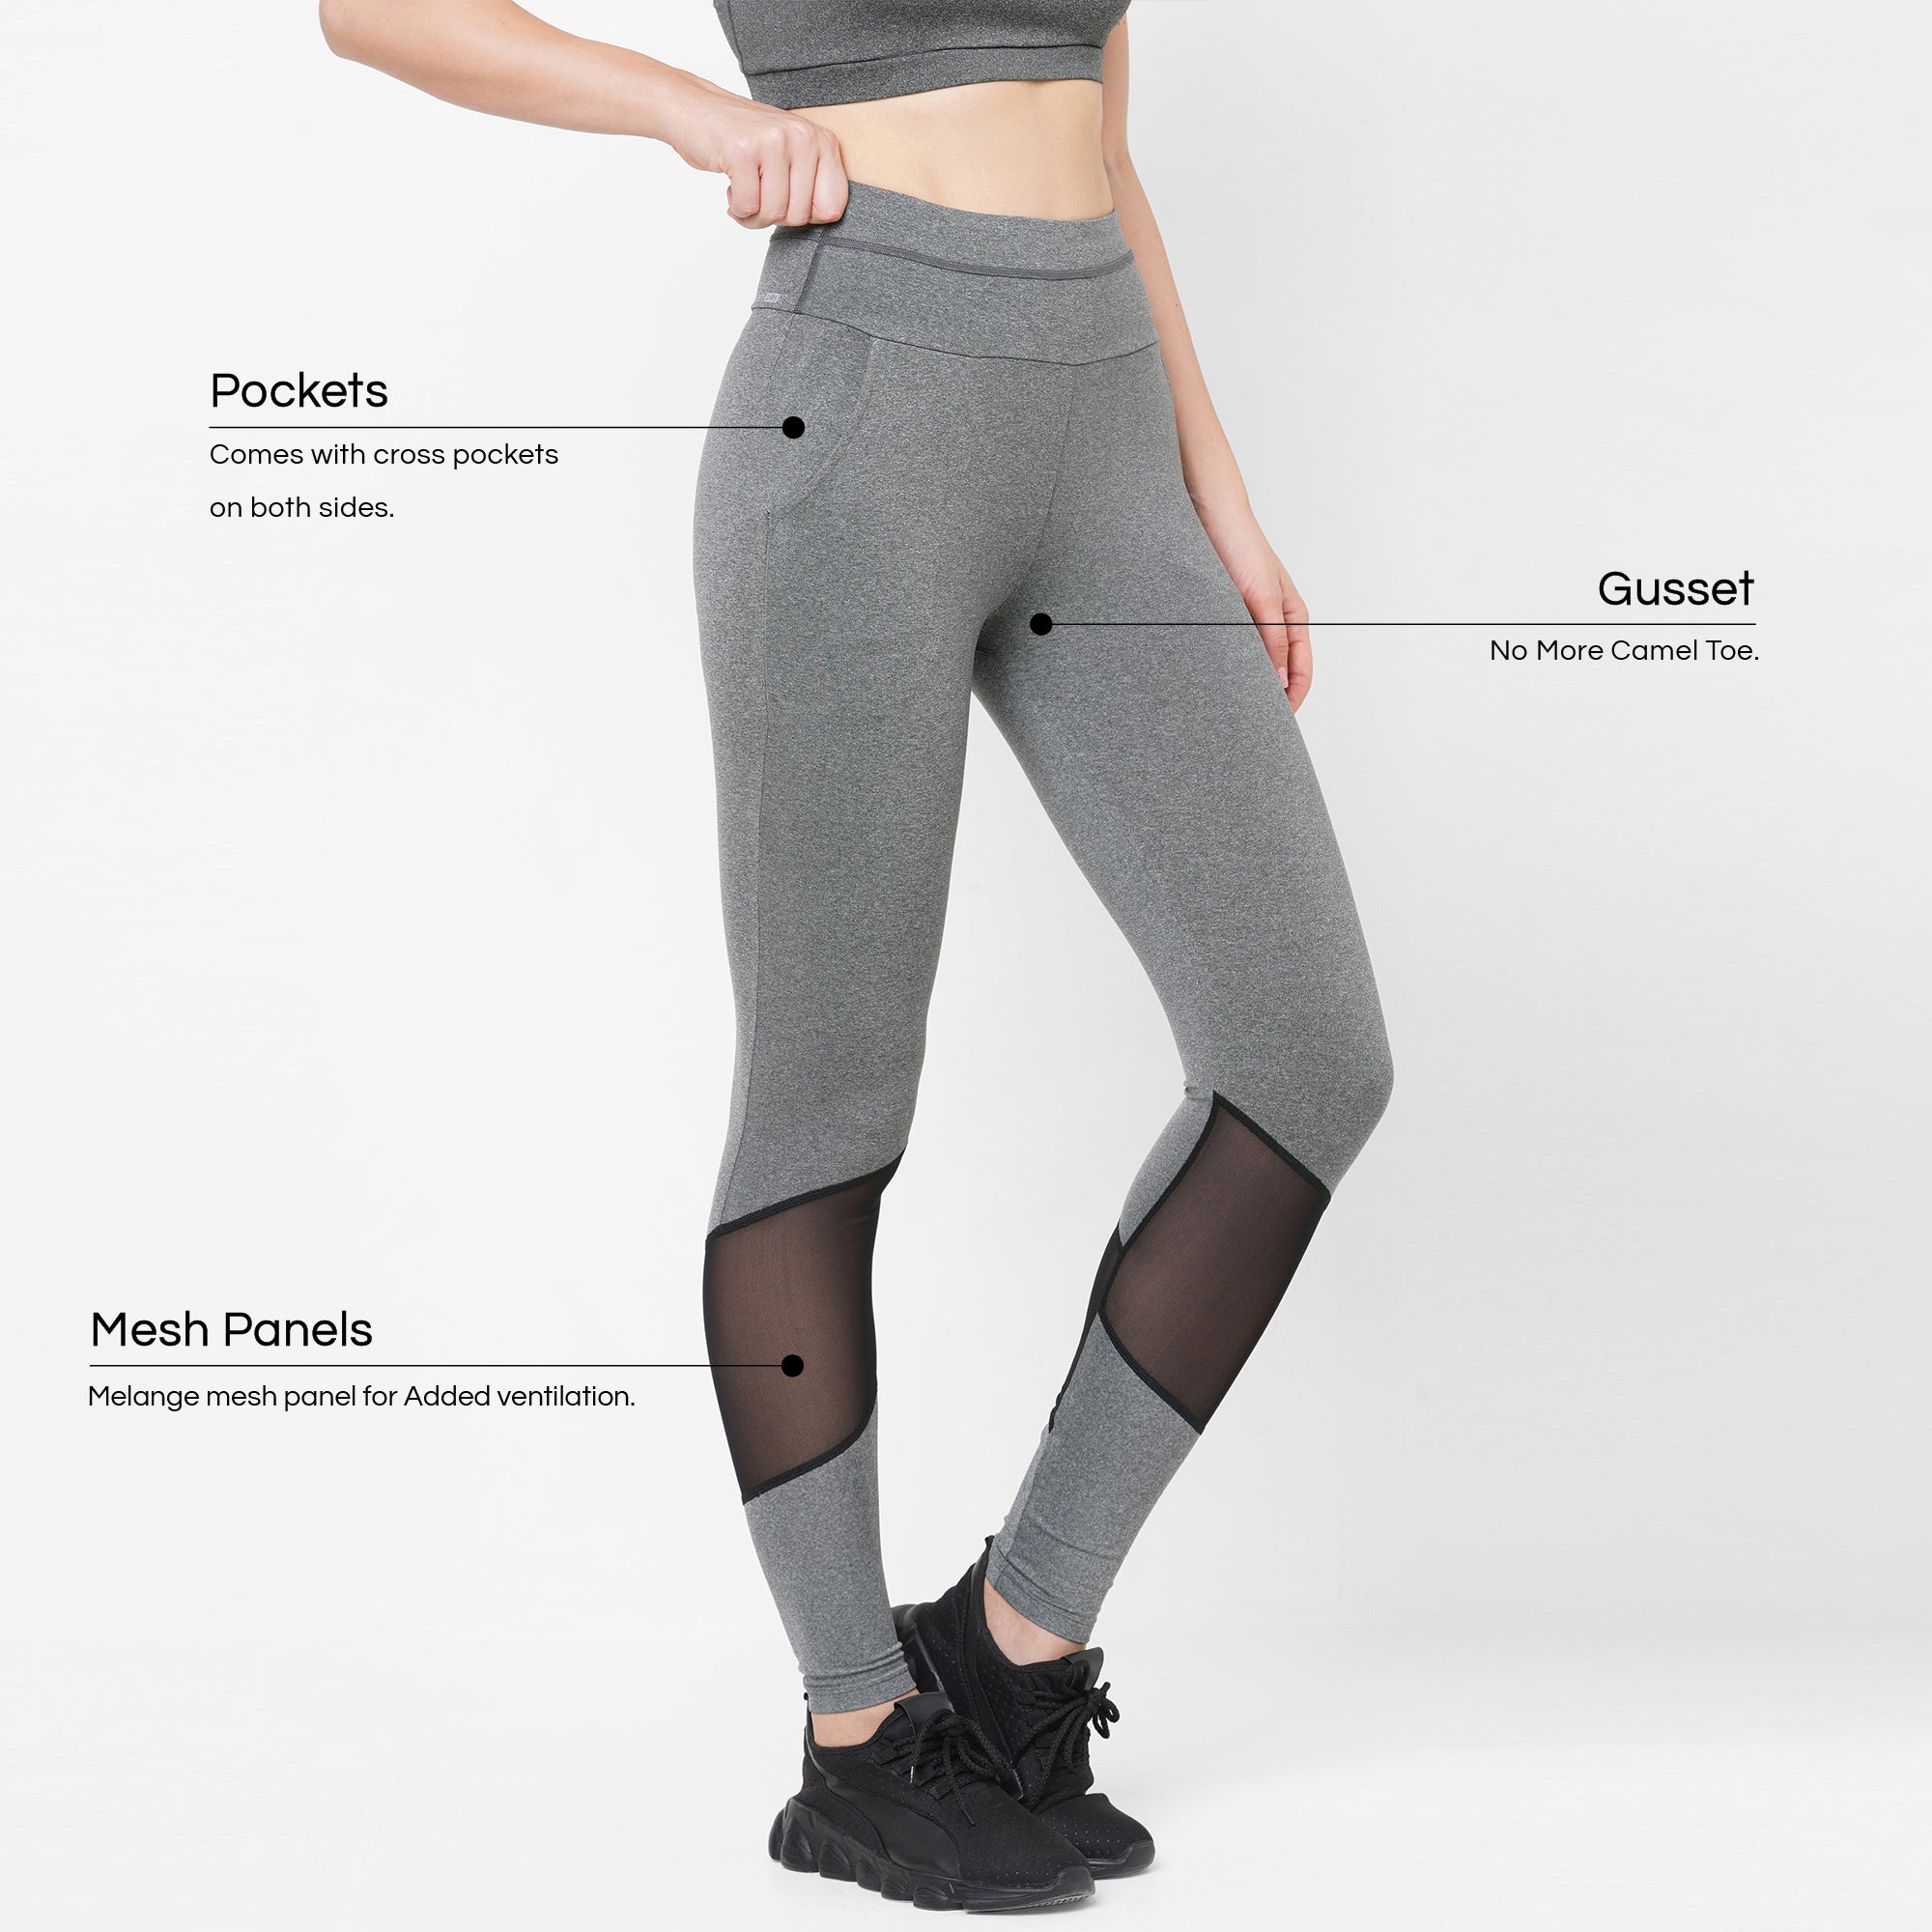 Buy Lagira Leggings for Women Side Pocket | Pants for Women in Black Color  | Girls Tights for Workout - Size S at Amazon.in